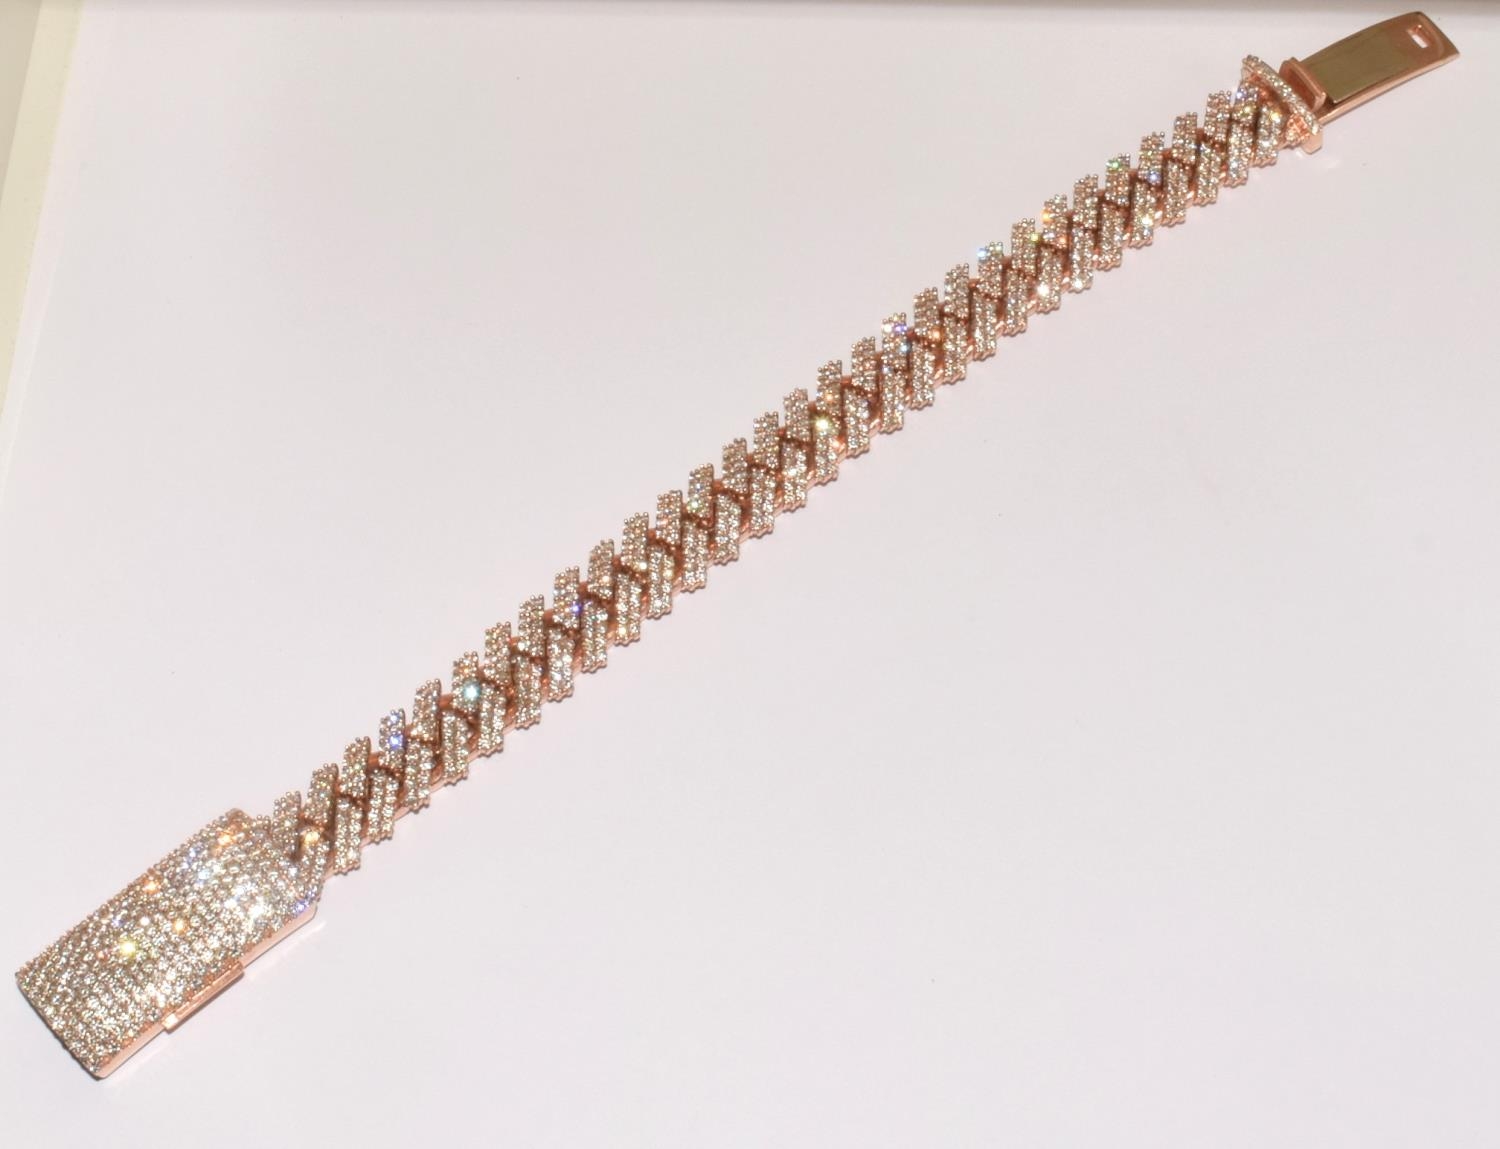 10ct rose gold Diamond encrusted bracelet set with approx 5ct diamonds in a herring bone pattern